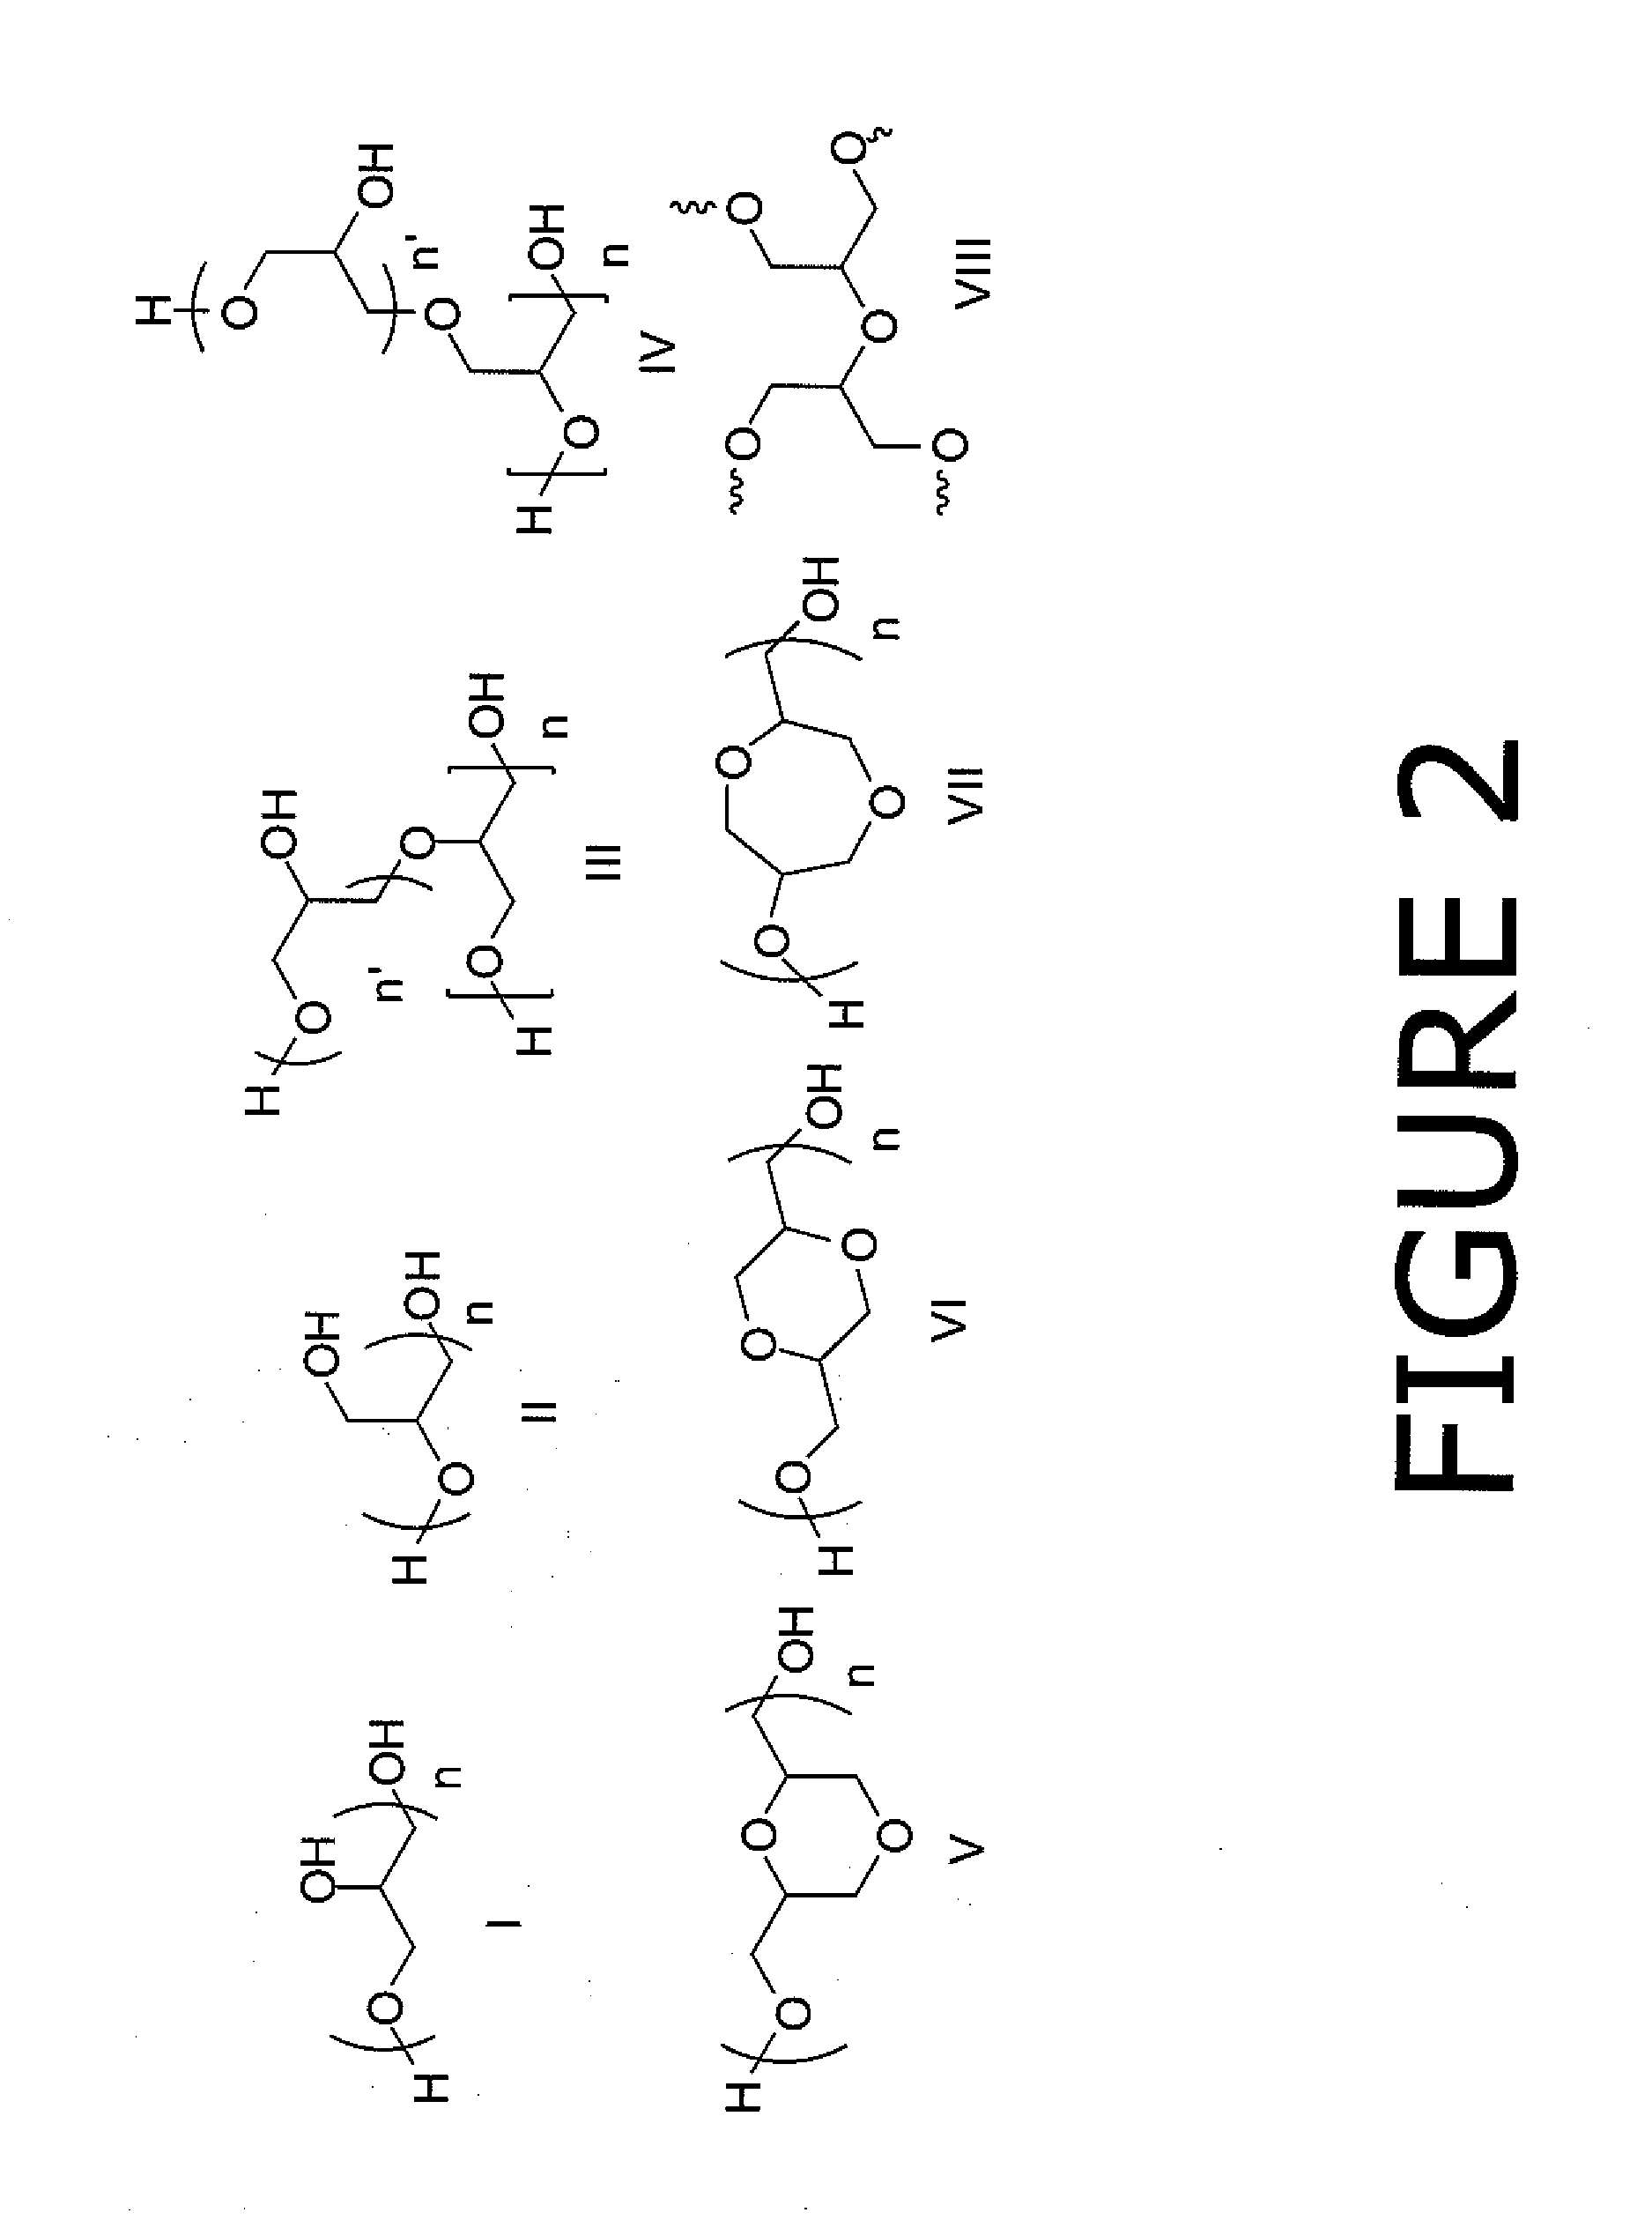 Production and composition of glycerol based polyols